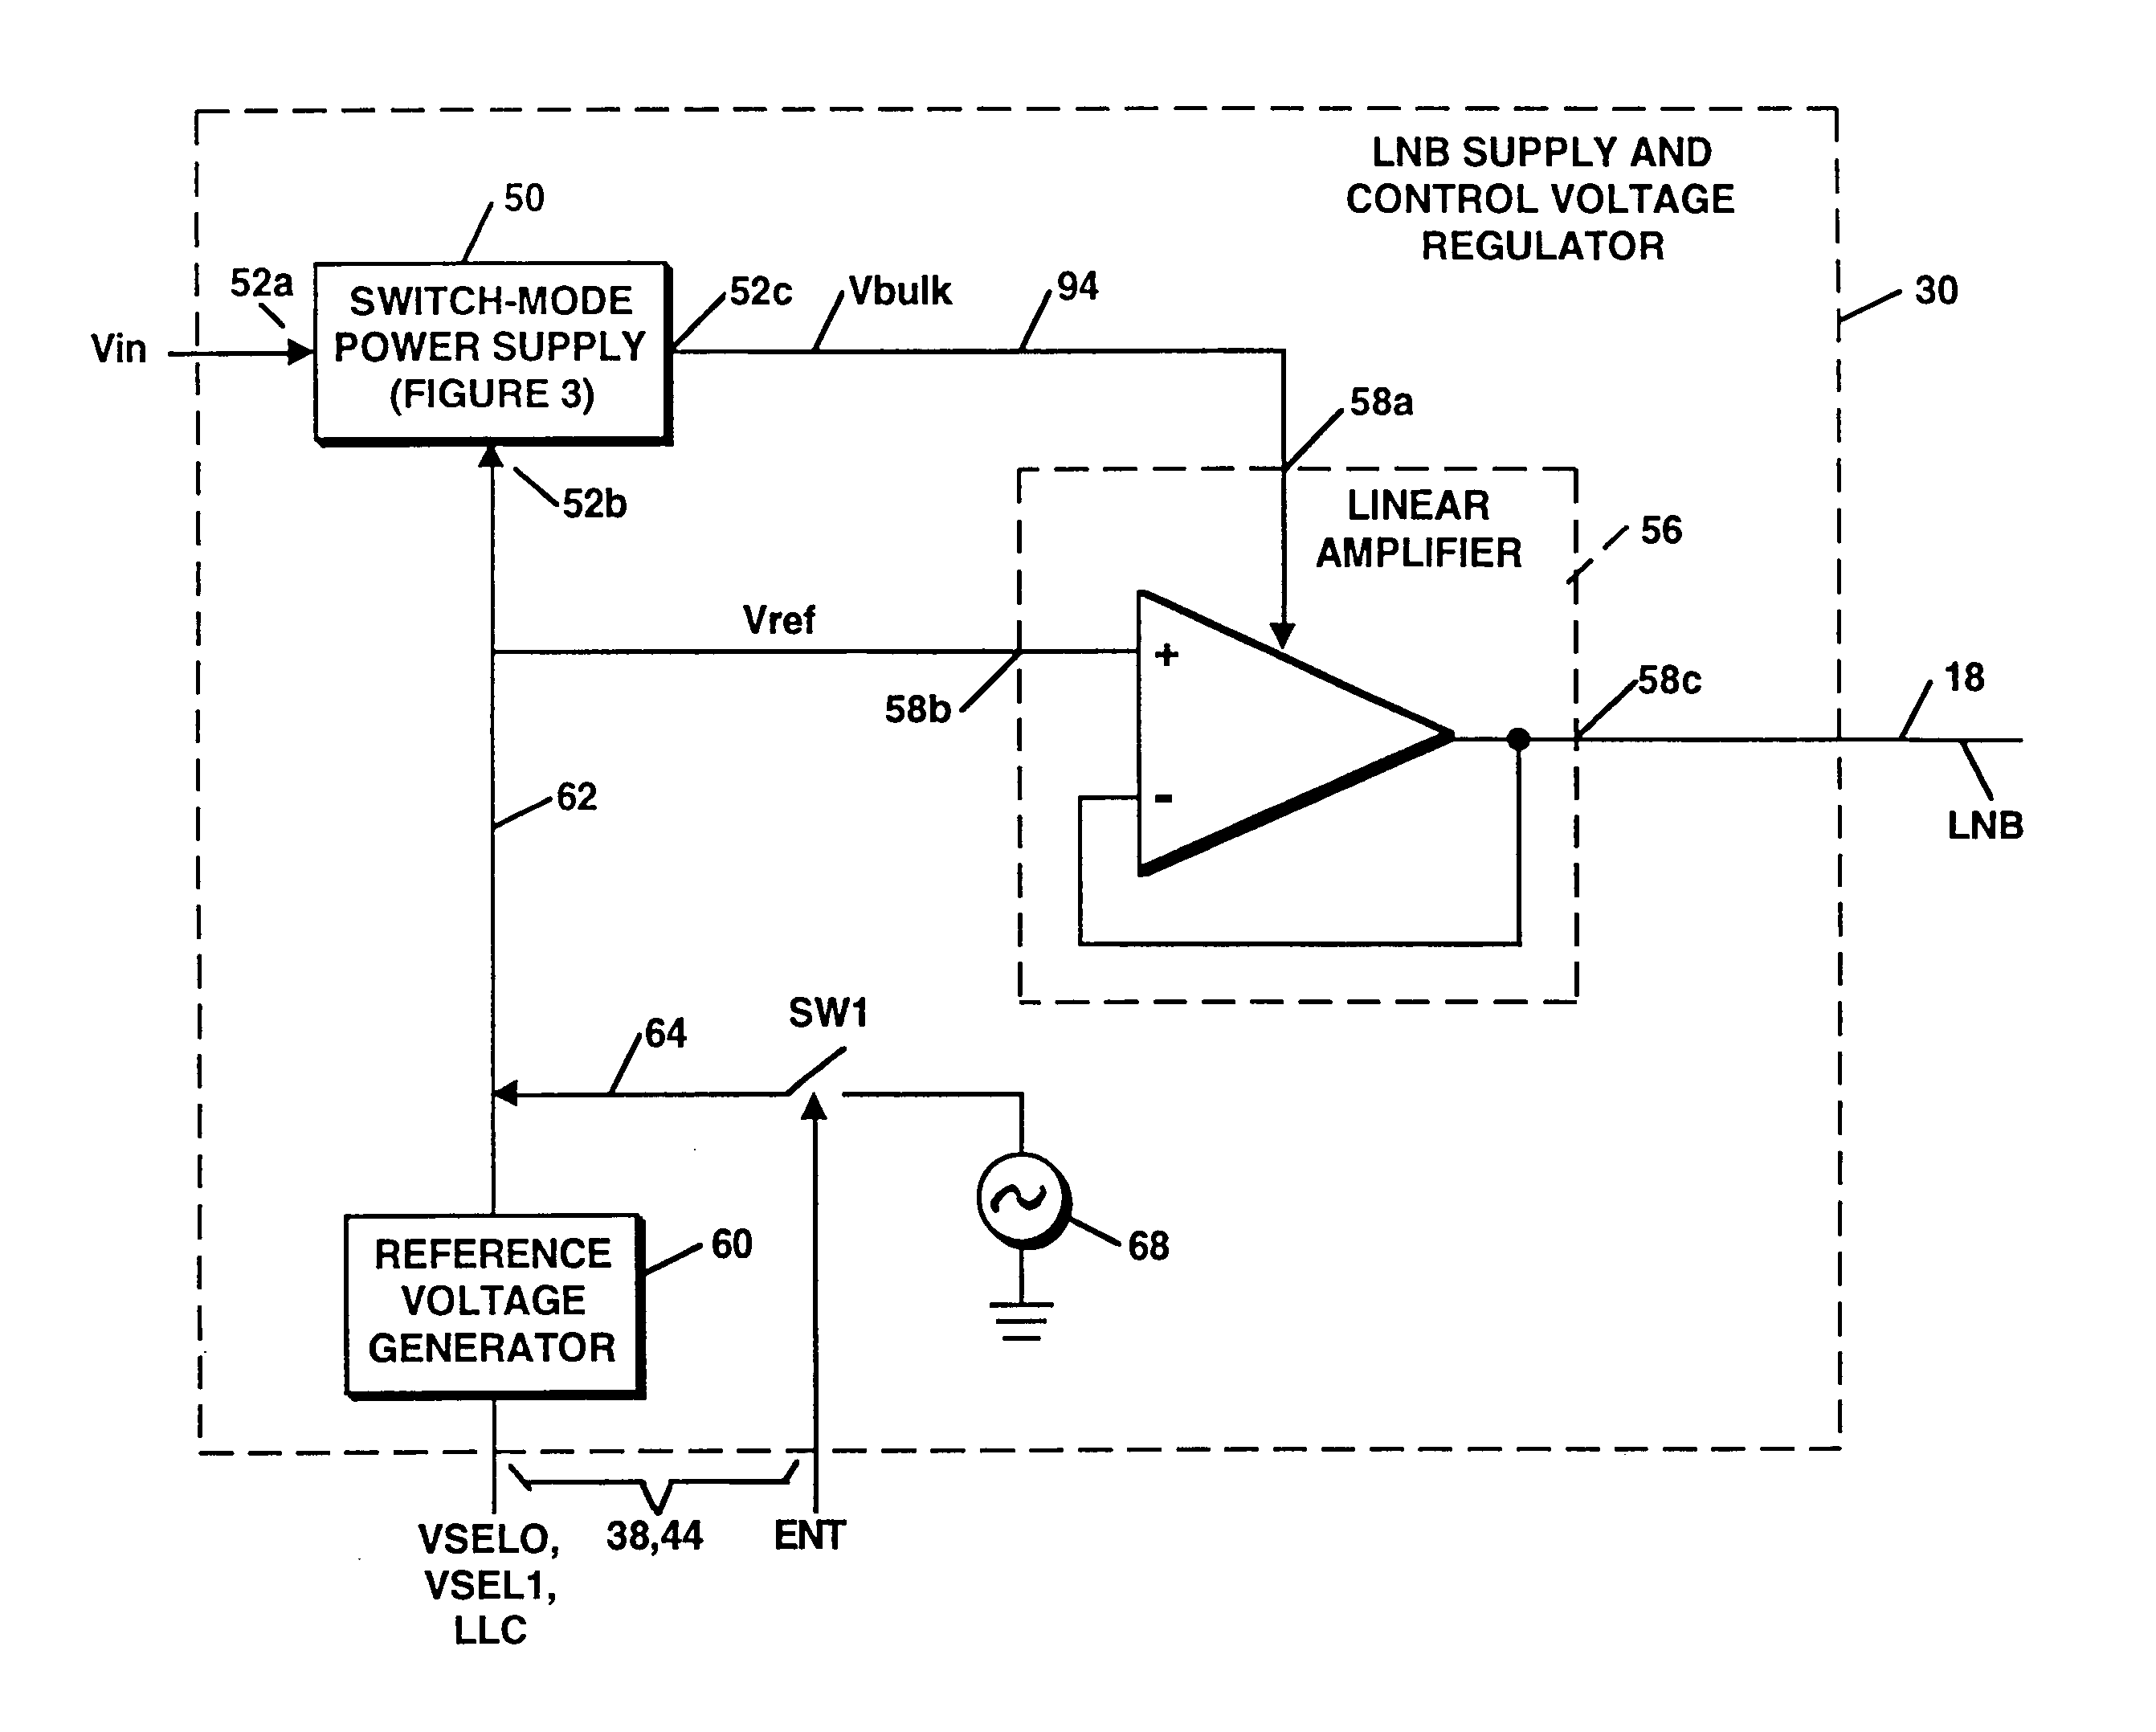 Low noise block supply and control voltage regulator